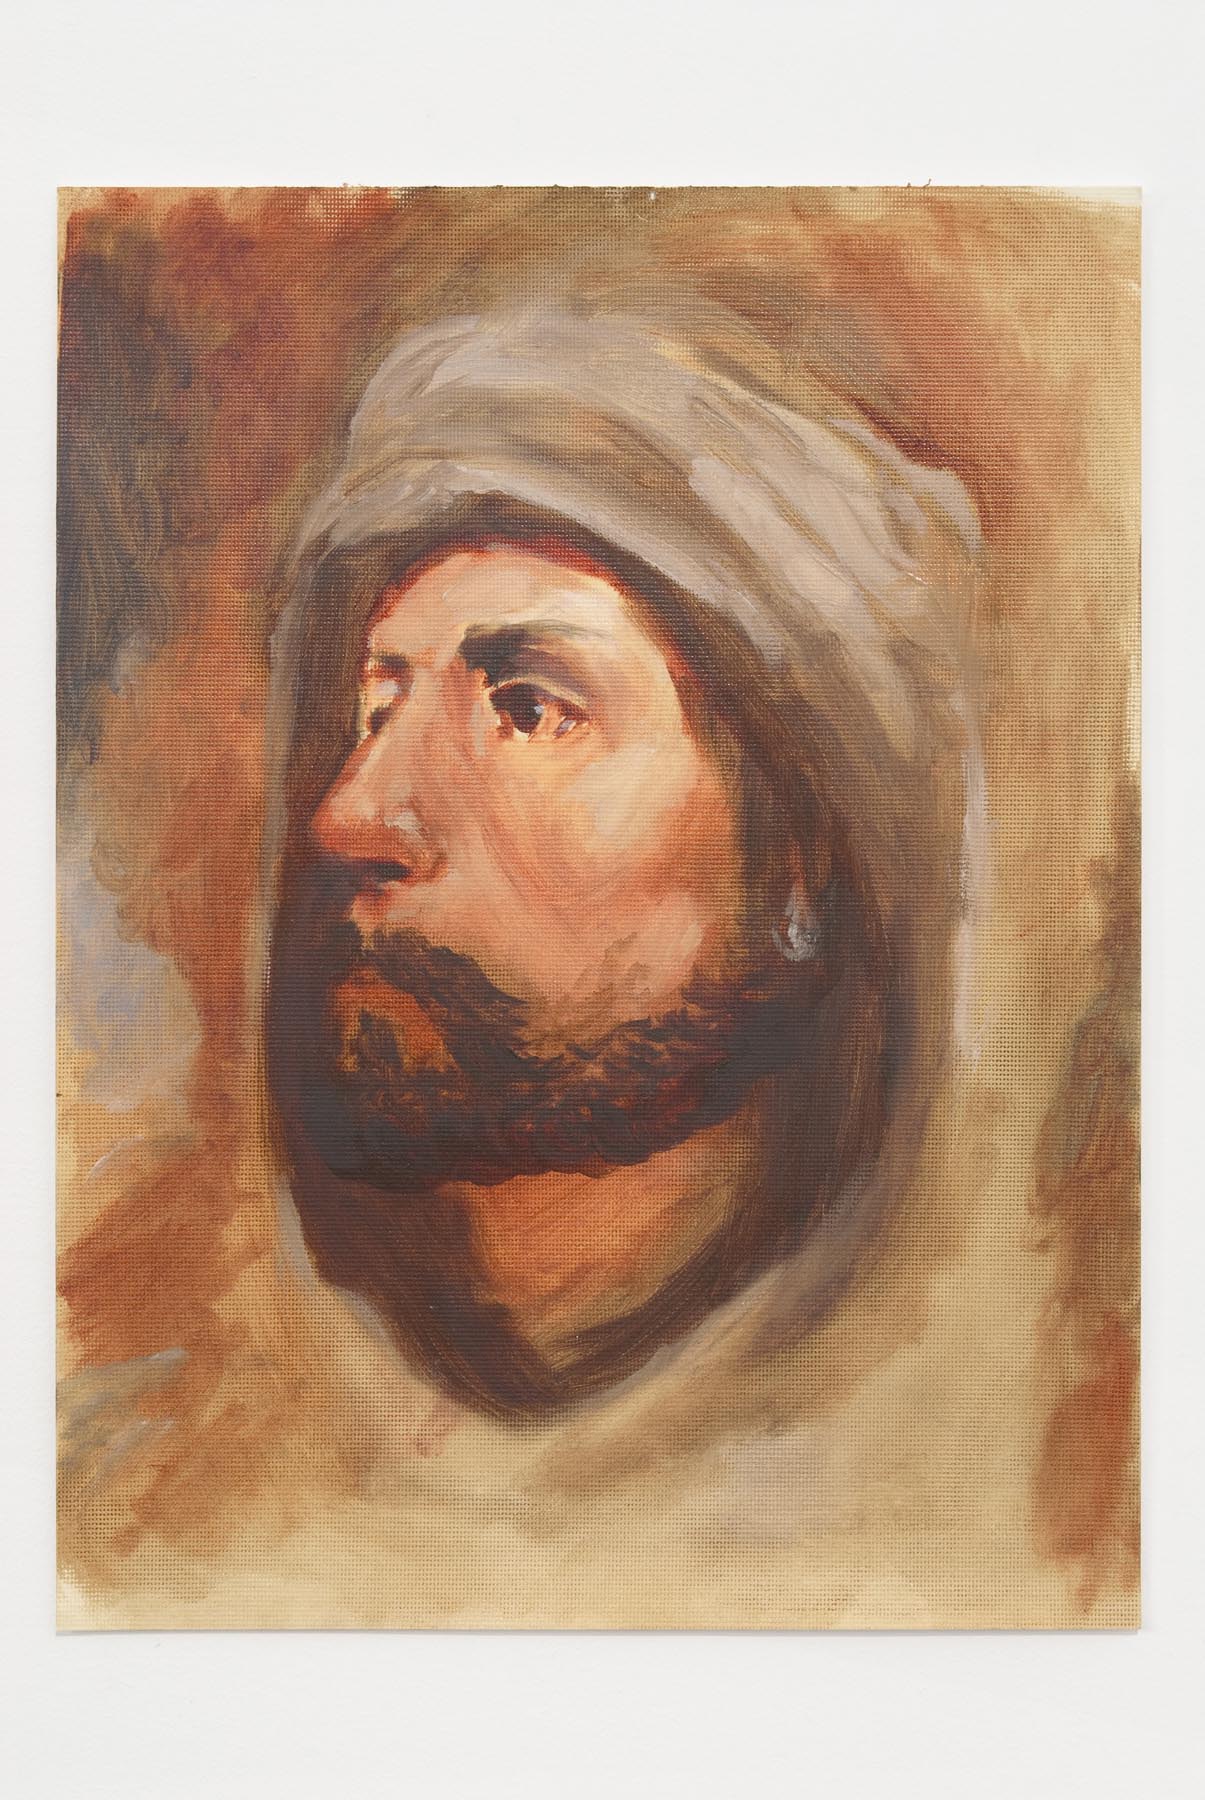      Man with A Pearl Earring (From The Hashishan)   2007   Oil on Canvas Paper   30.5 x 23 cm  